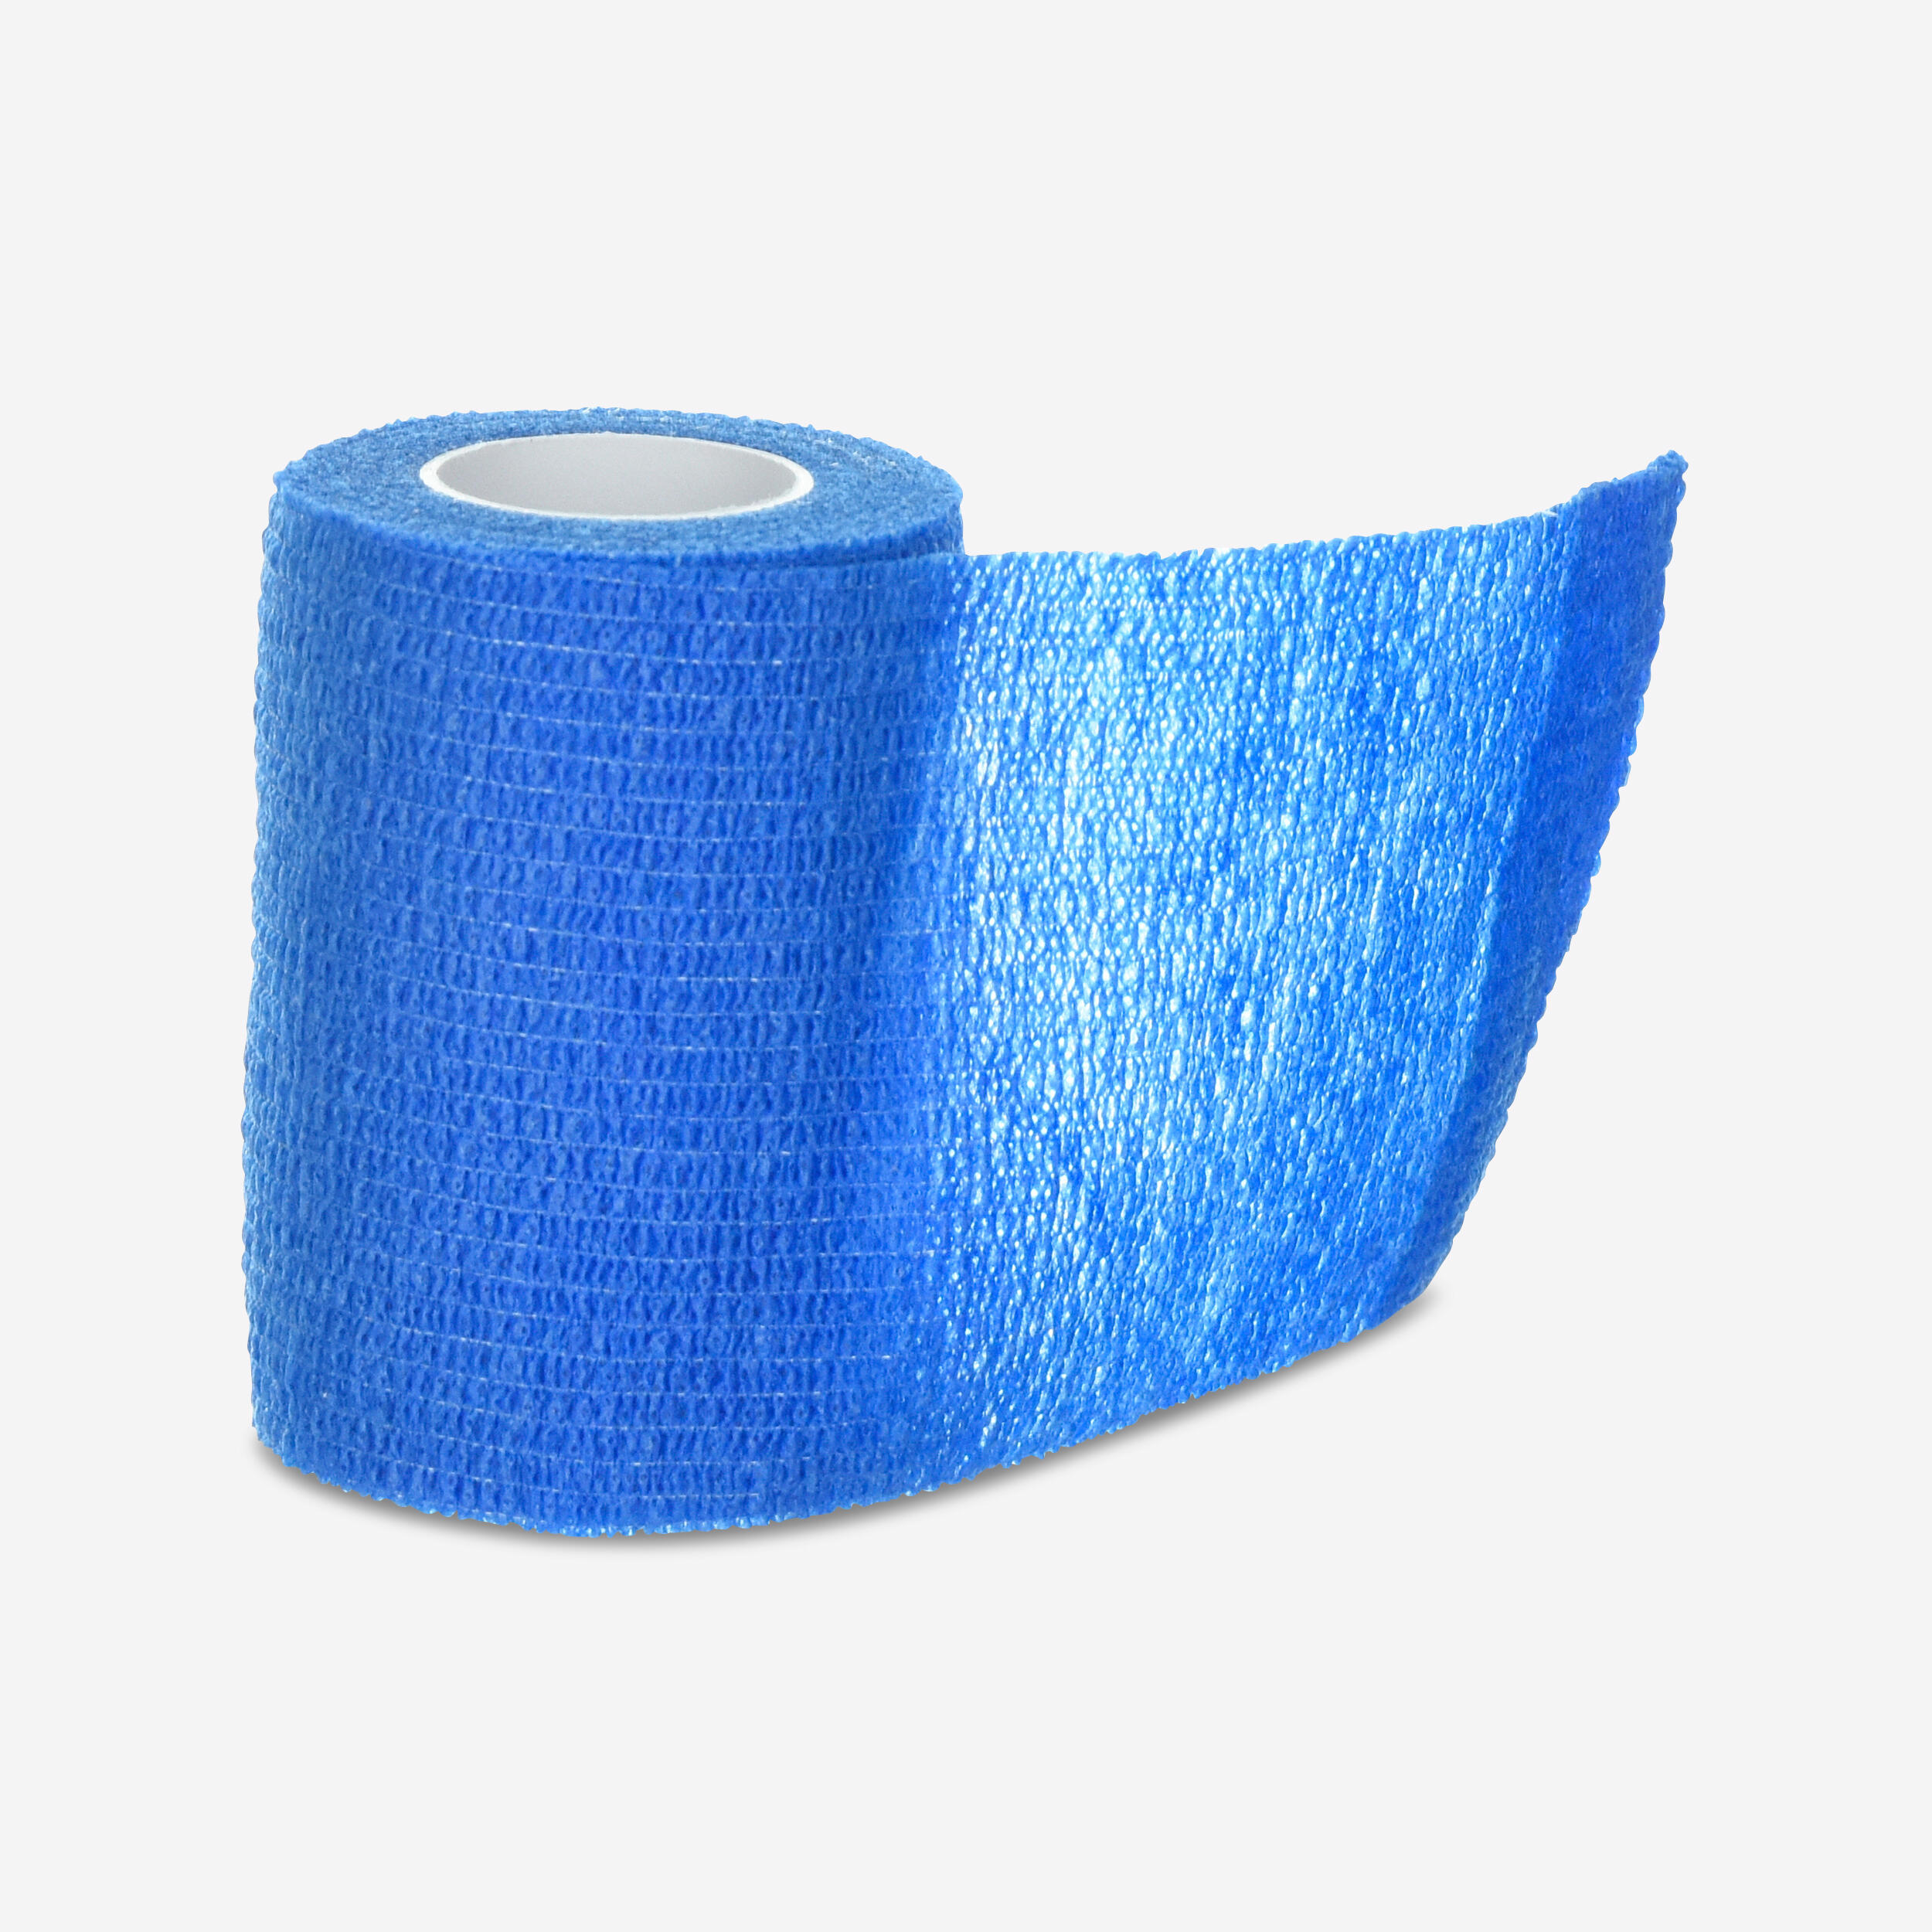 TARMAK 7.5 cm x 4.5 m Movable Self-Adhesive Supportive Wrap - Blue